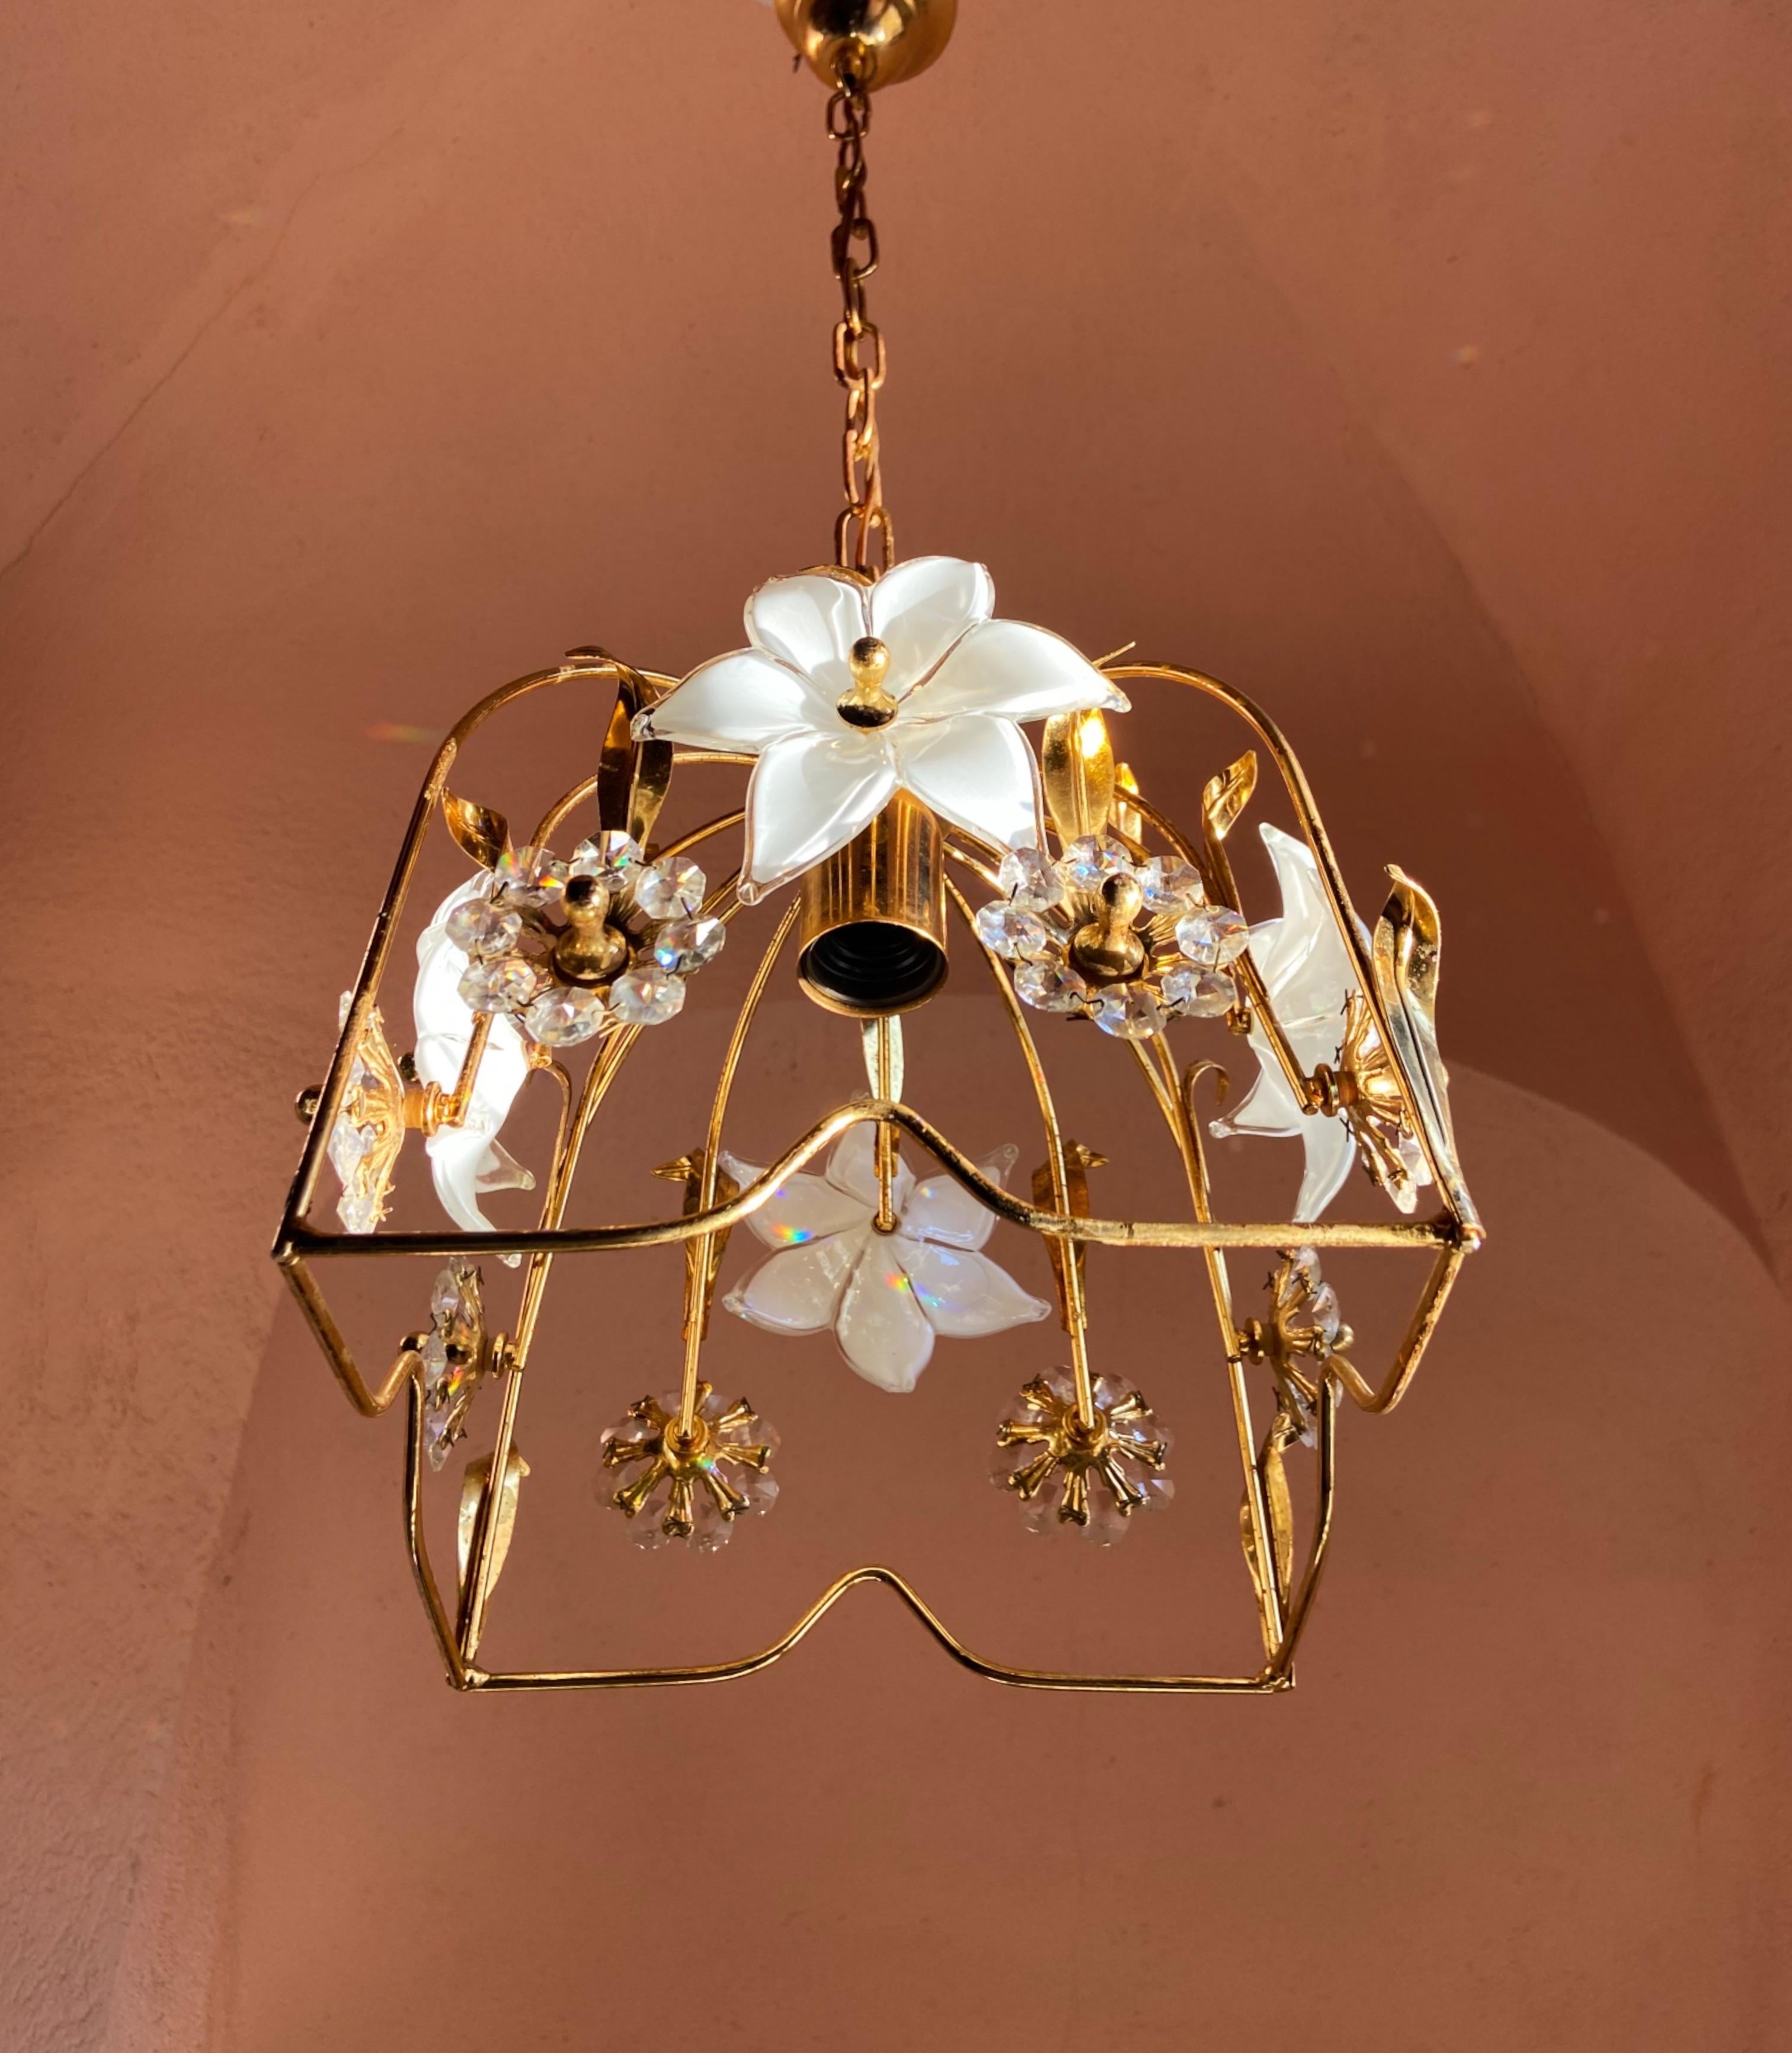 Charming ceiling light, composed of a golden base adorned with white Murano glass flowers.
Every flower is unique in it's shape since the are hand blown.
Glass are without any chips, the metal base has patina.

Details
Dimensions: Height 30 cm